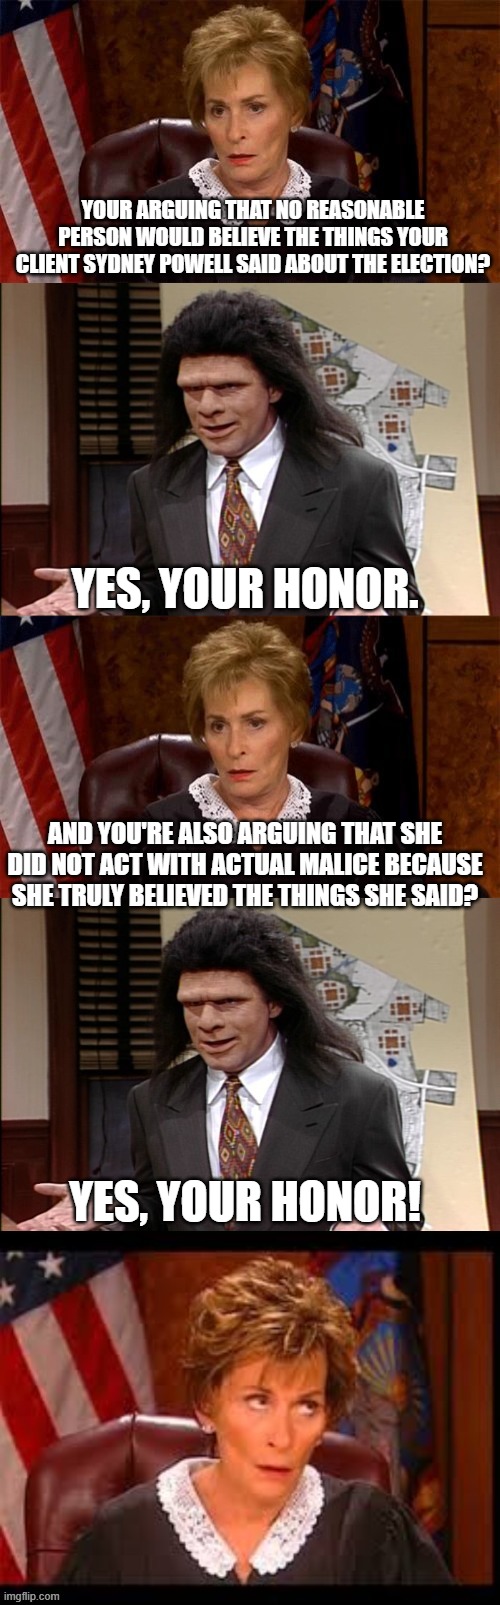 this is her actual motion to dismiss | YOUR ARGUING THAT NO REASONABLE PERSON WOULD BELIEVE THE THINGS YOUR CLIENT SYDNEY POWELL SAID ABOUT THE ELECTION? YES, YOUR HONOR. AND YOU'RE ALSO ARGUING THAT SHE DID NOT ACT WITH ACTUAL MALICE BECAUSE SHE TRULY BELIEVED THE THINGS SHE SAID? YES, YOUR HONOR! | image tagged in judge v lawyer | made w/ Imgflip meme maker